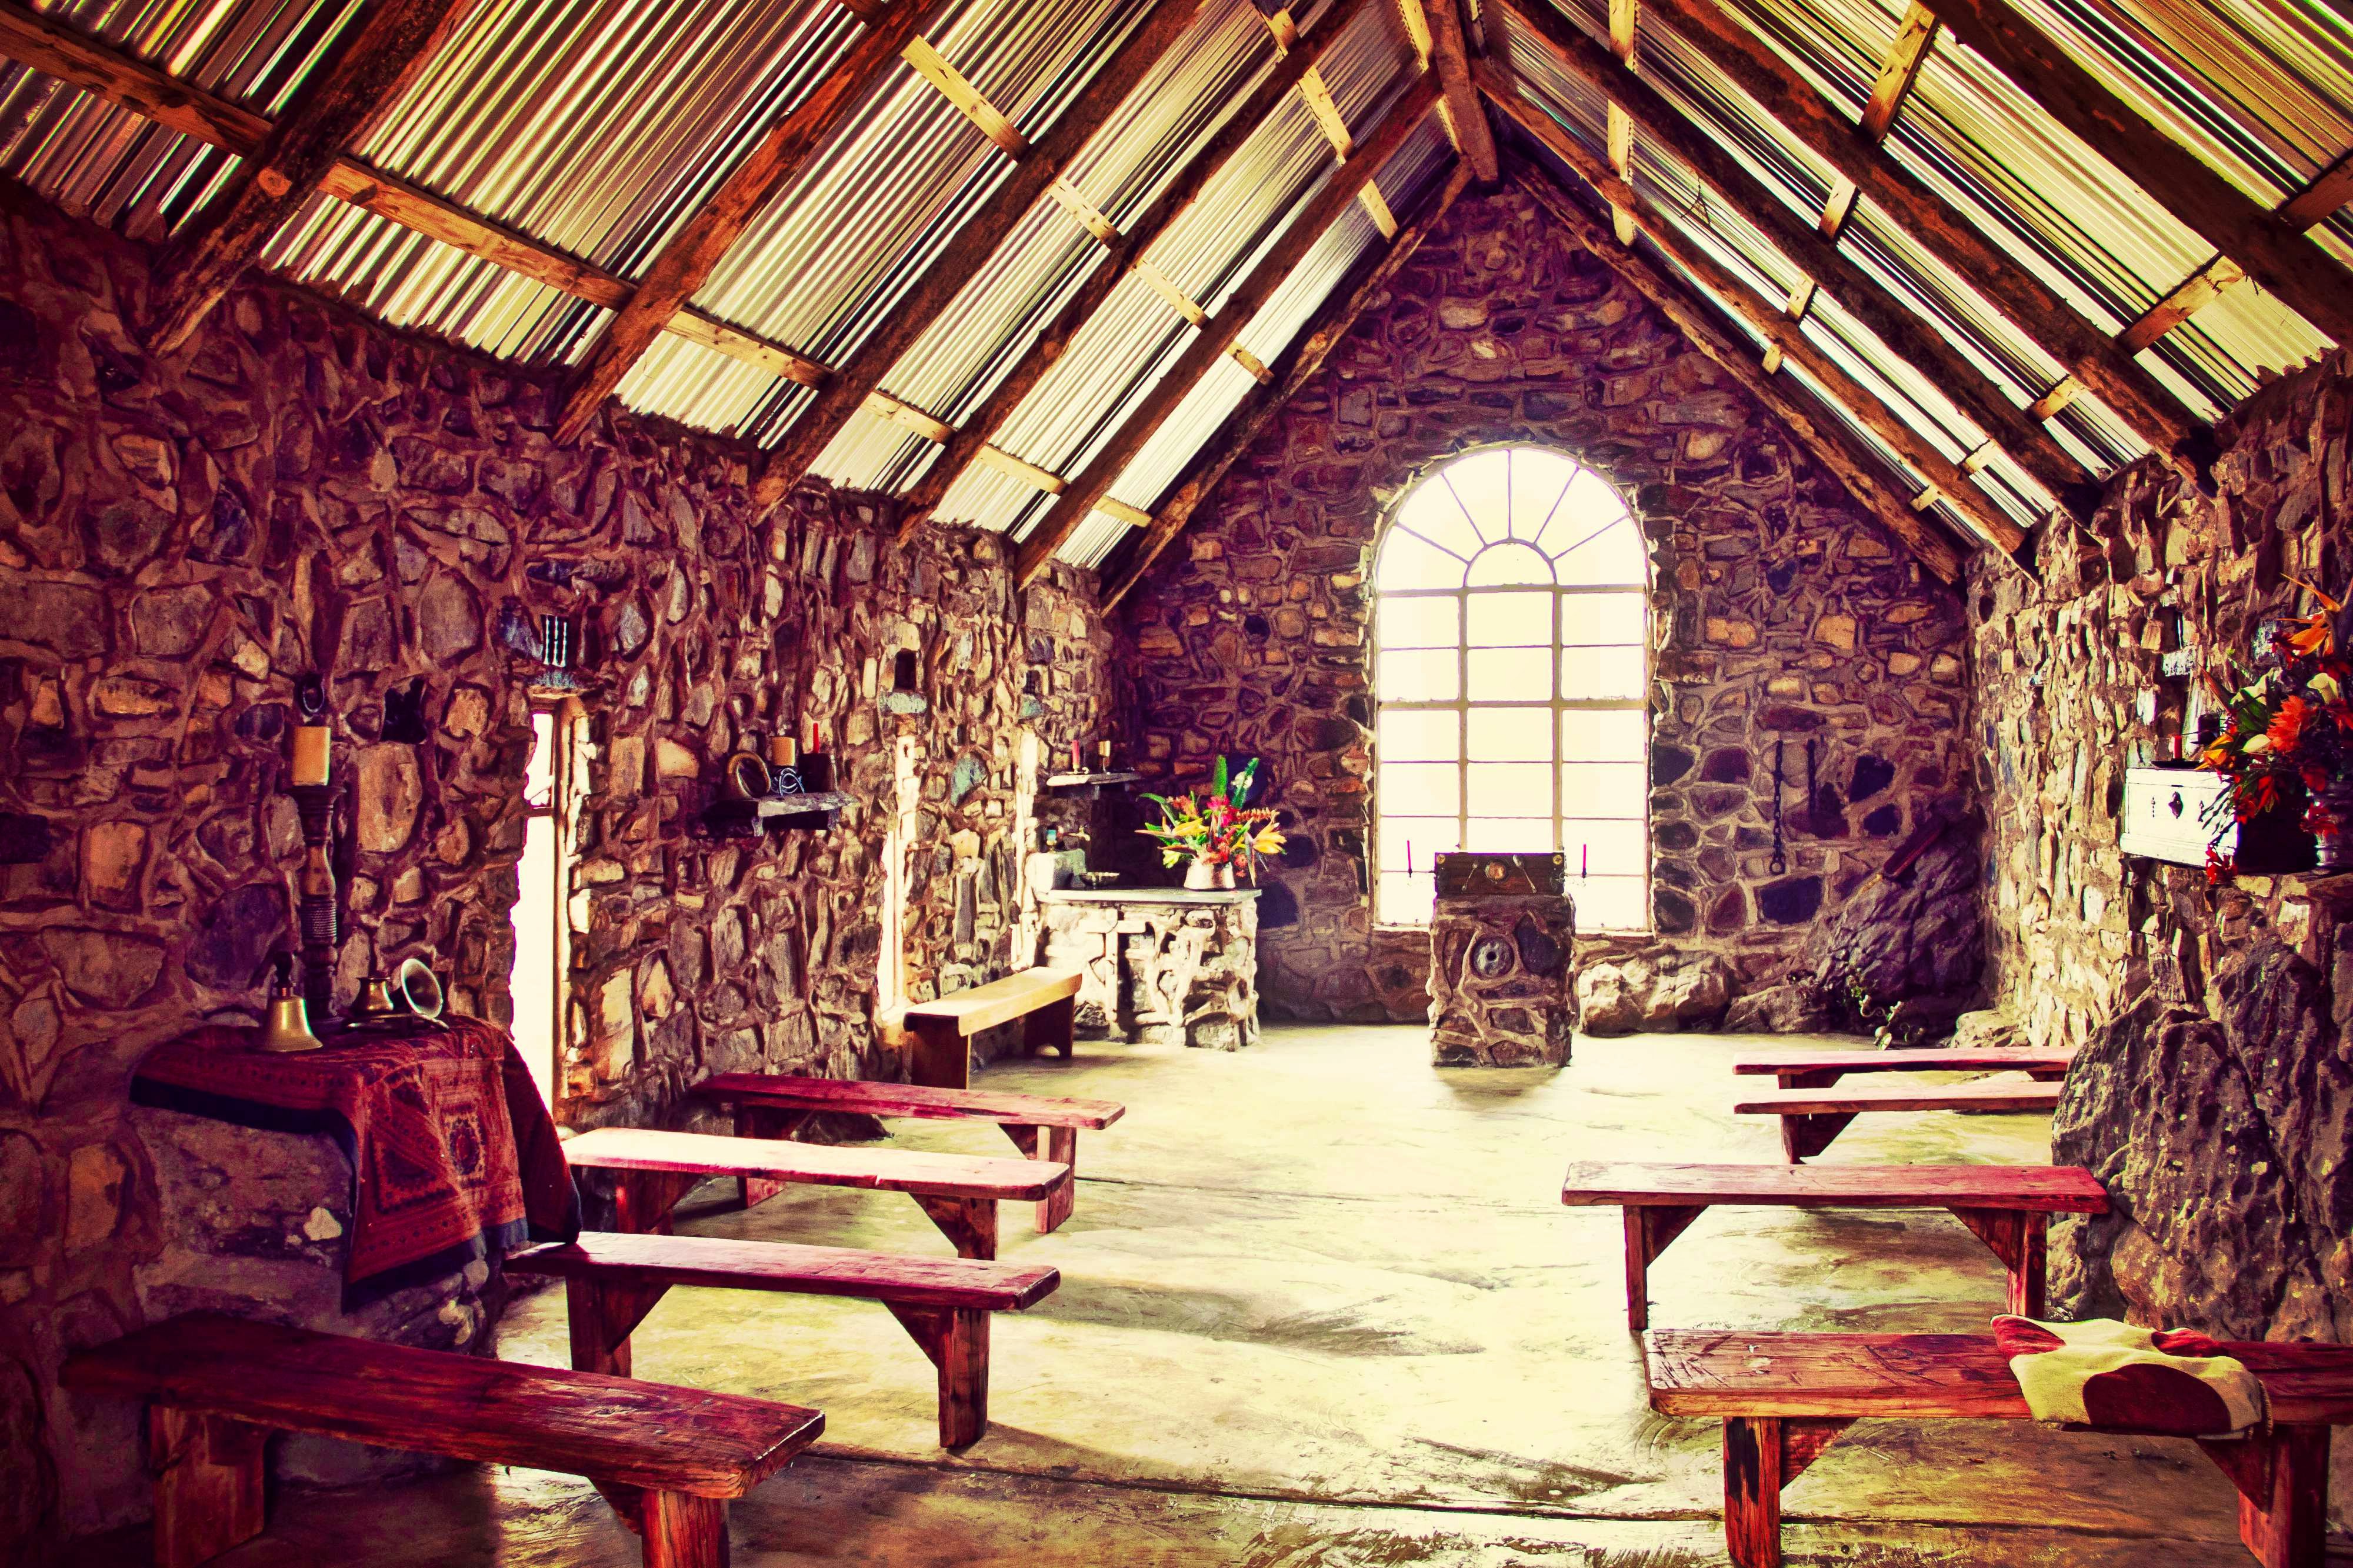 Cloudforest Chapel & Camping